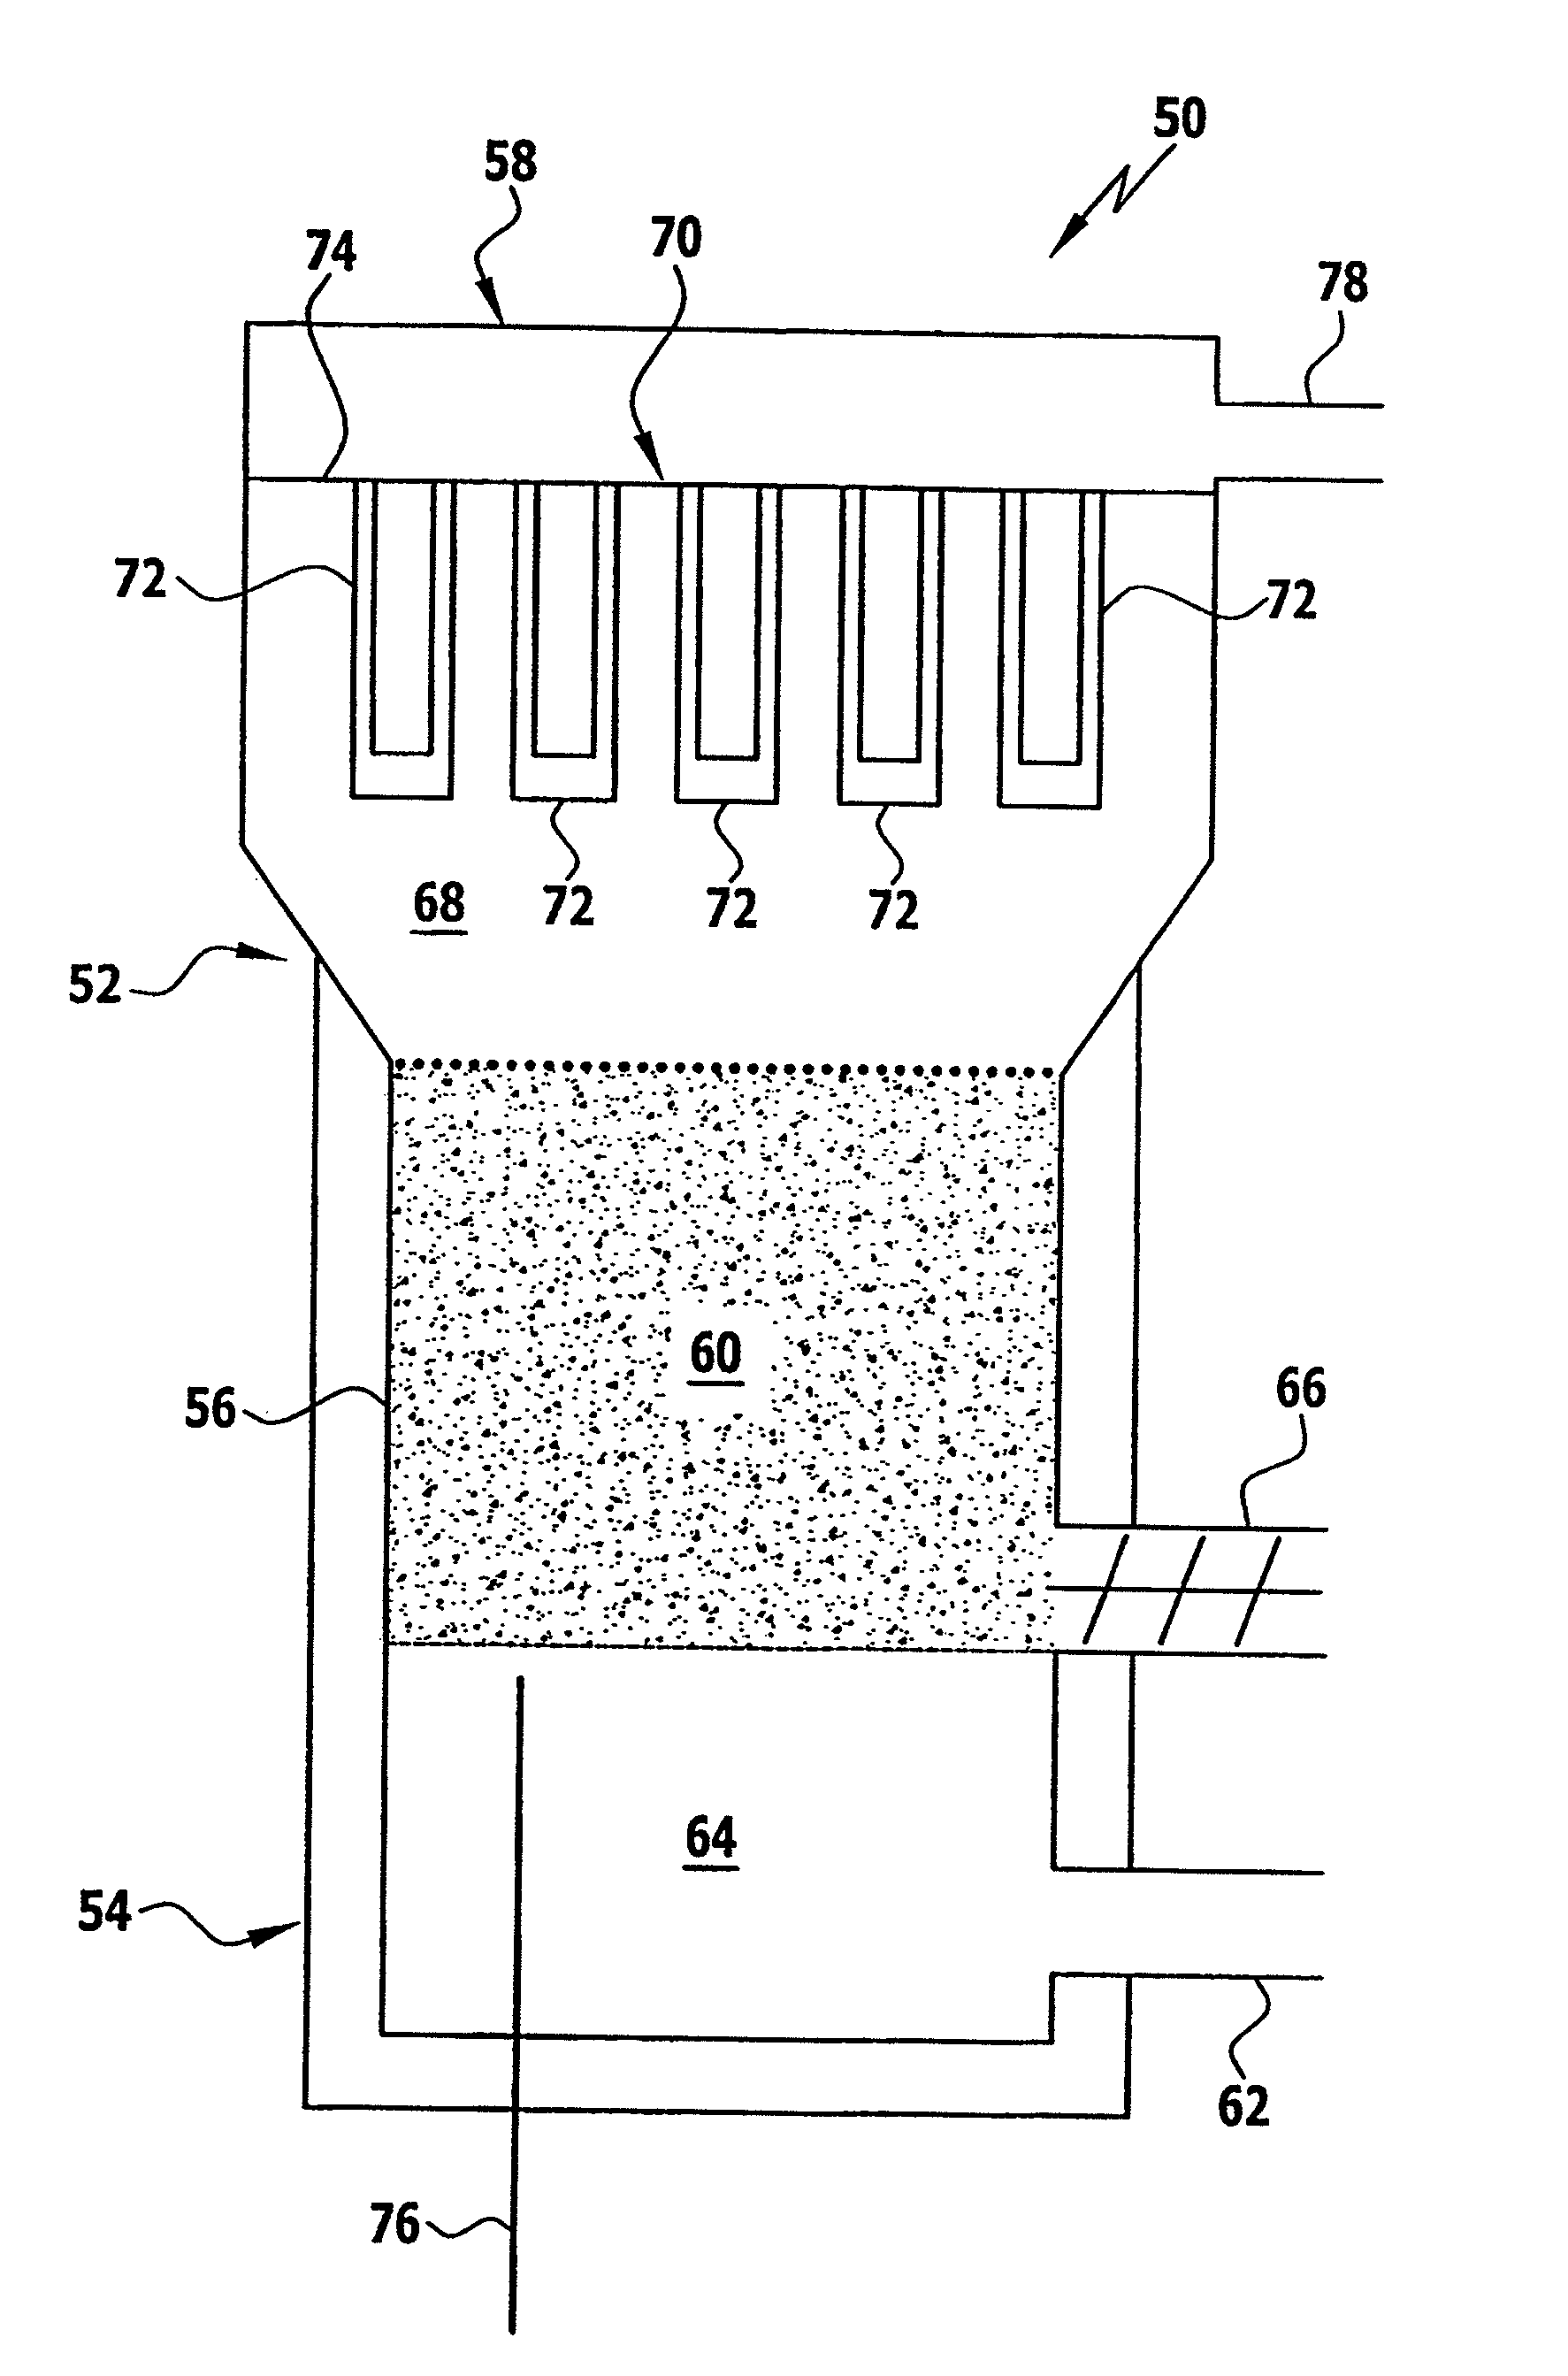 Gasification apparatus and method for generating syngas from gasifiable feedstock material